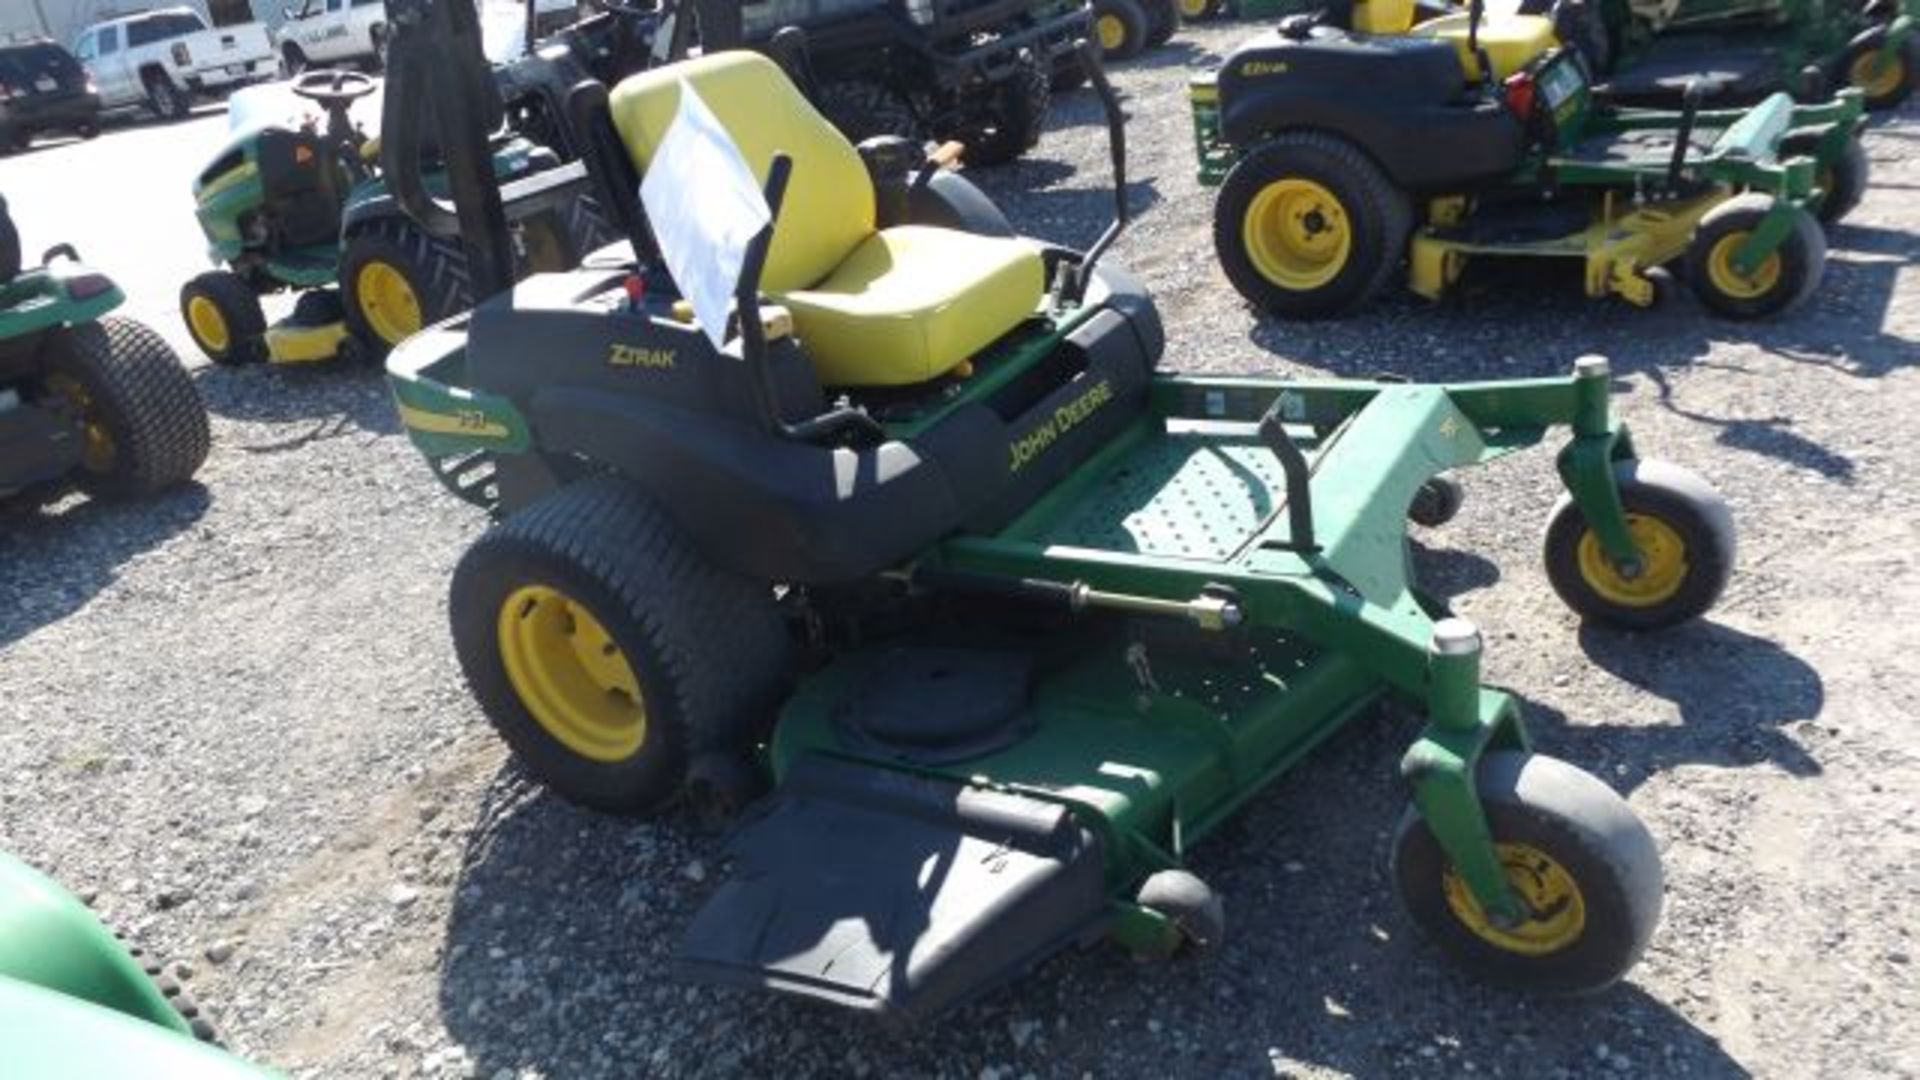 2007 JD 757 Mid Z Pro Mower #112268, 981 hrs, 60" Deck, 25hp Honda V-Twin installed at 856 hrs,